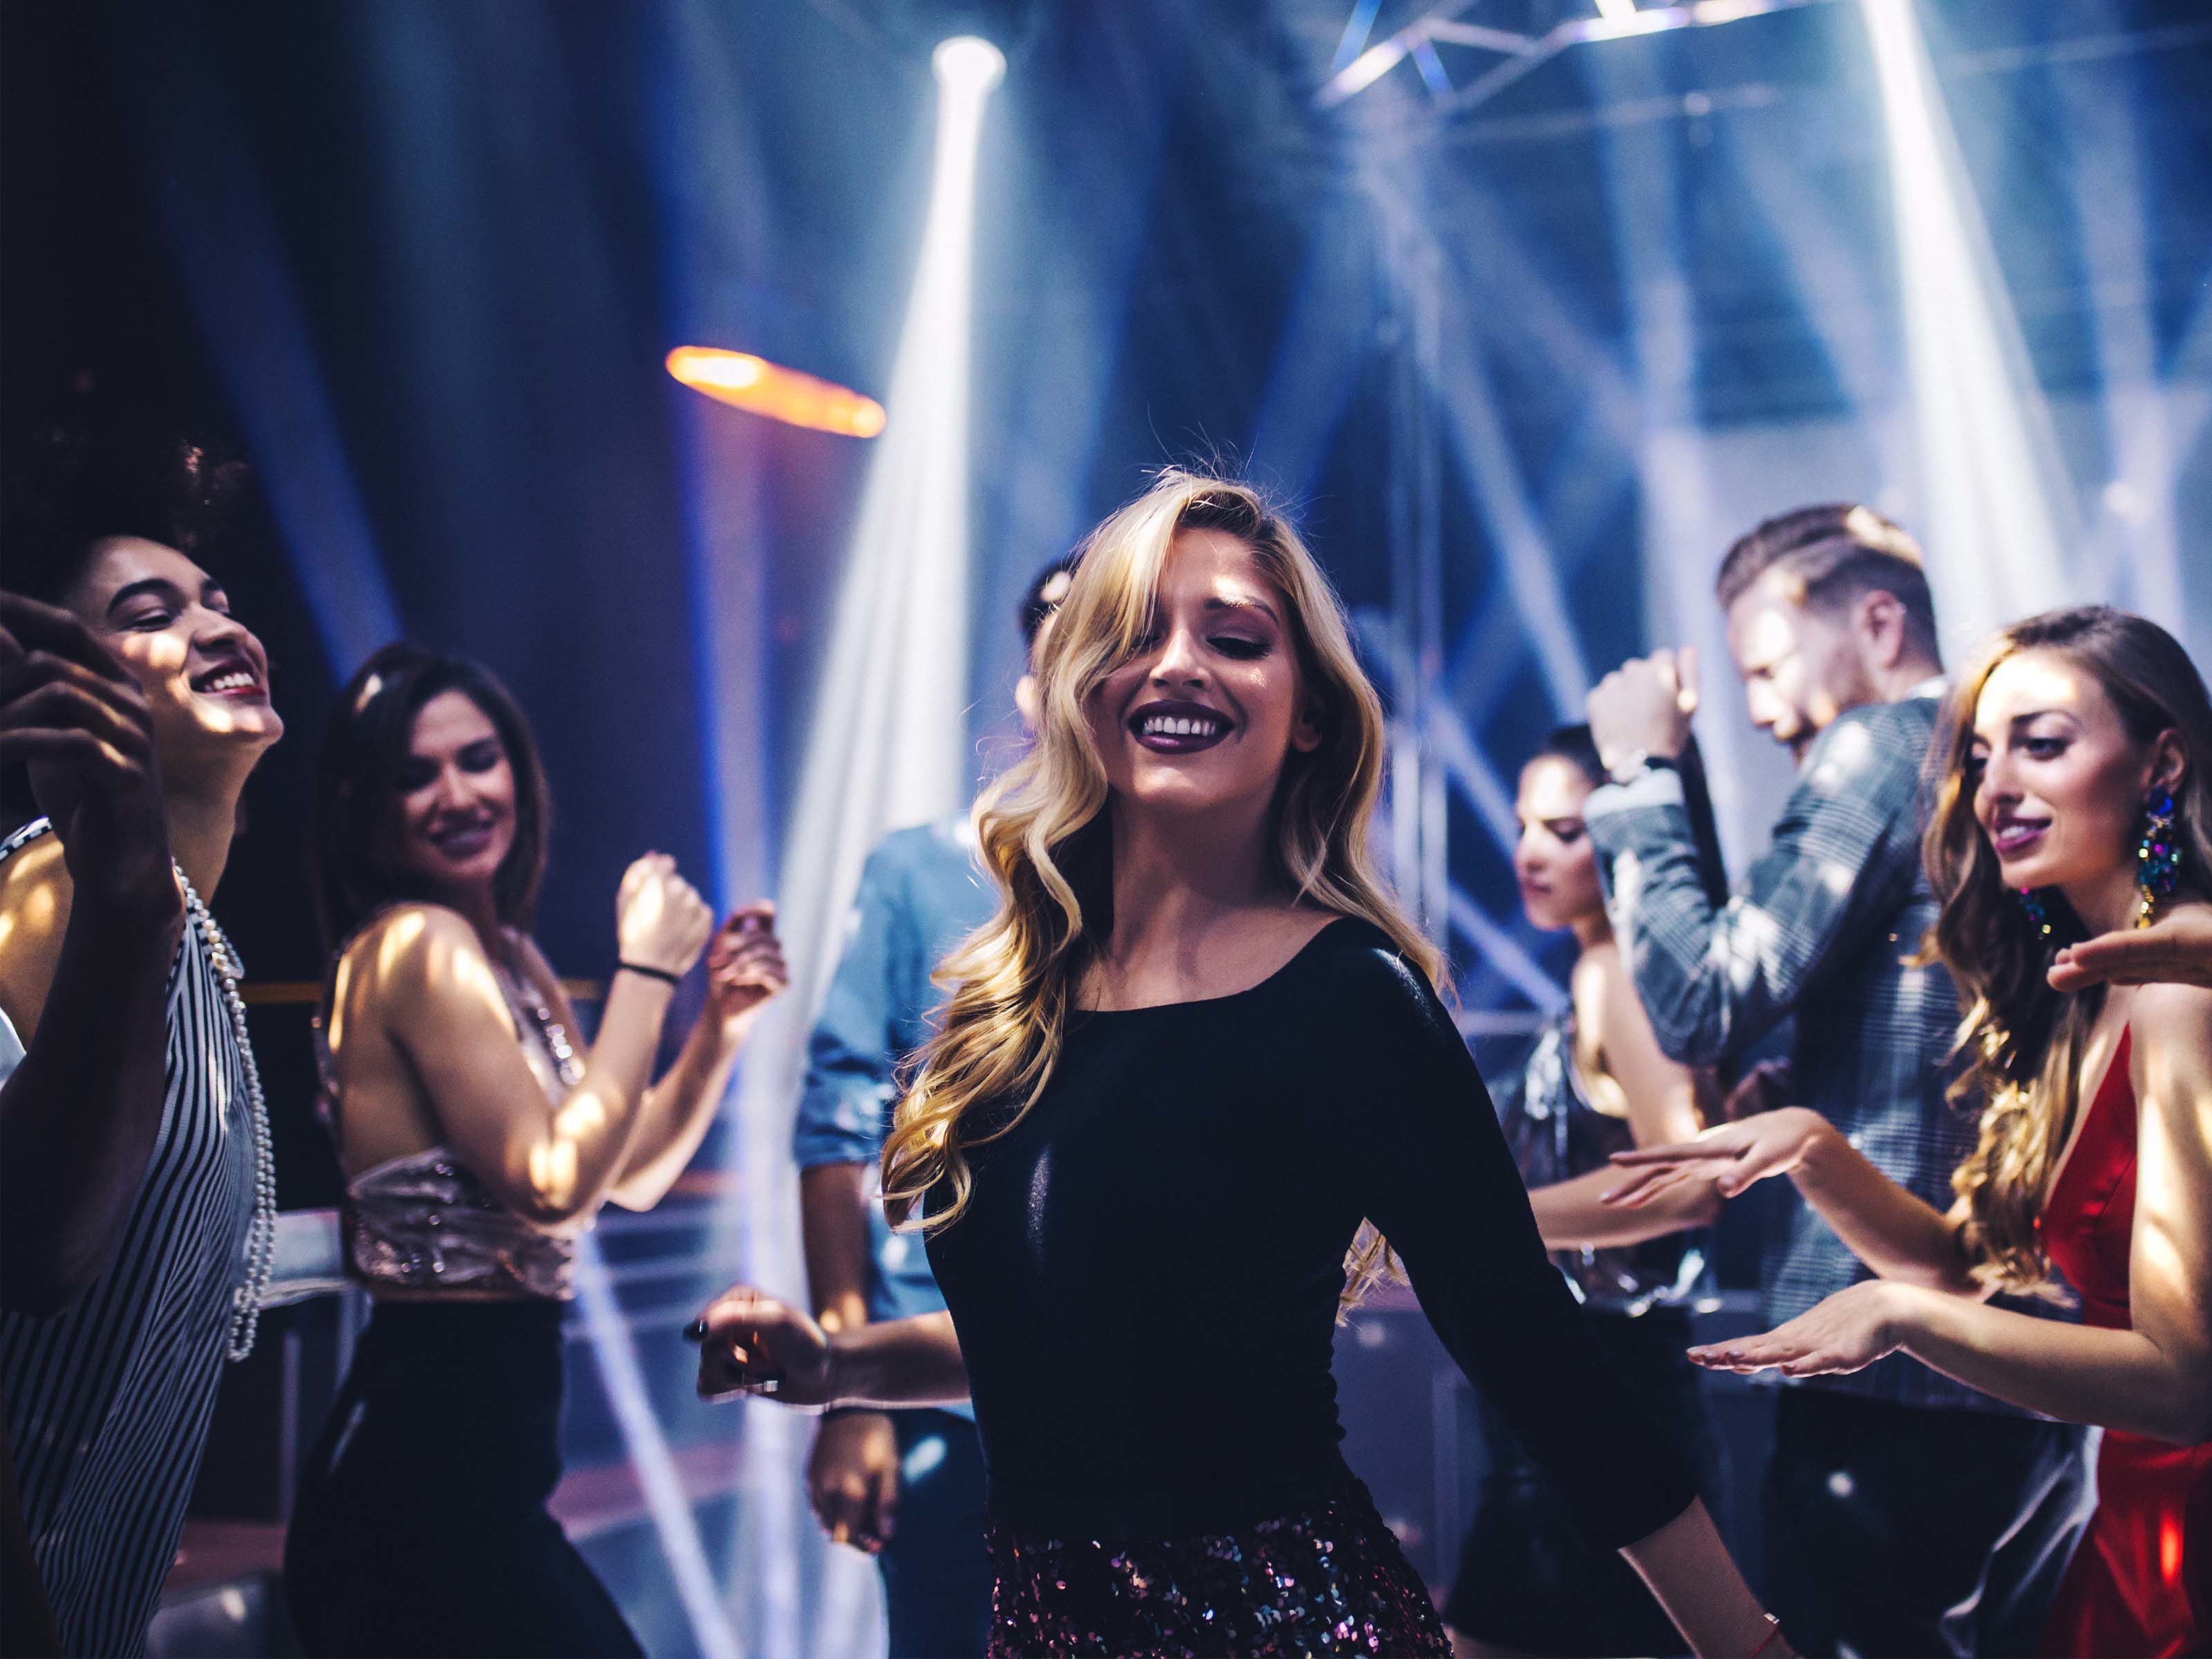 Nightclub Entry for Groups in London | Book Online